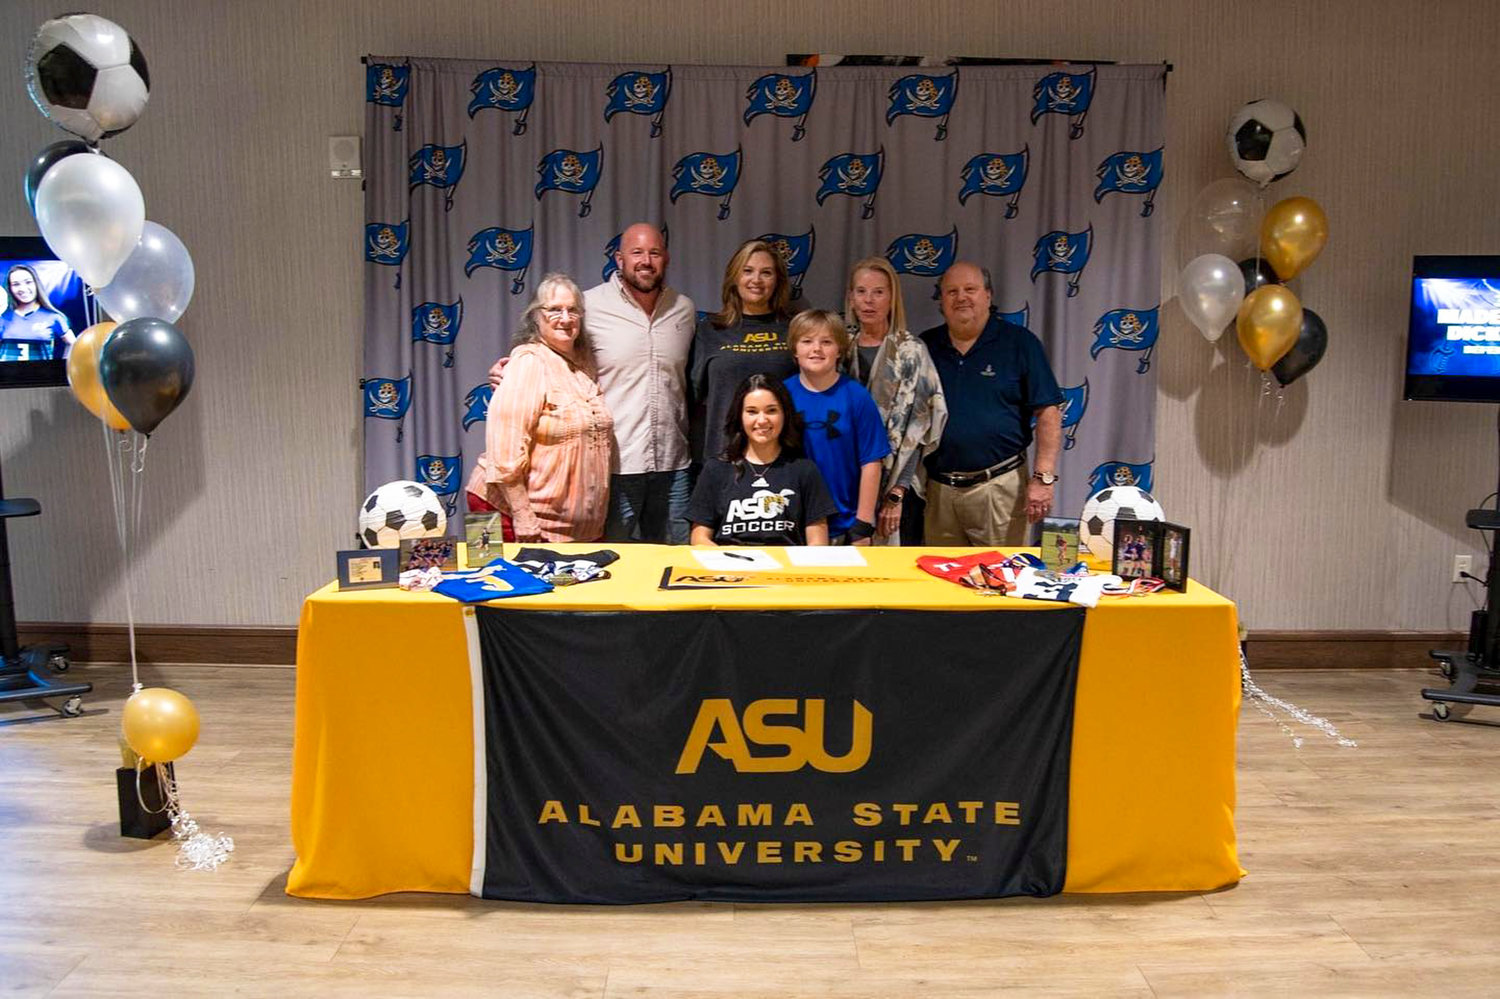 Fairhope senior defender Madeline Dicksey was joined by family in signing with the Alabama State Hornets to lock in the verbal commitment she made in August. Dicksey was part of the Pirates’ state runner-up squad from last spring and will lace up one last time for Fairhope.